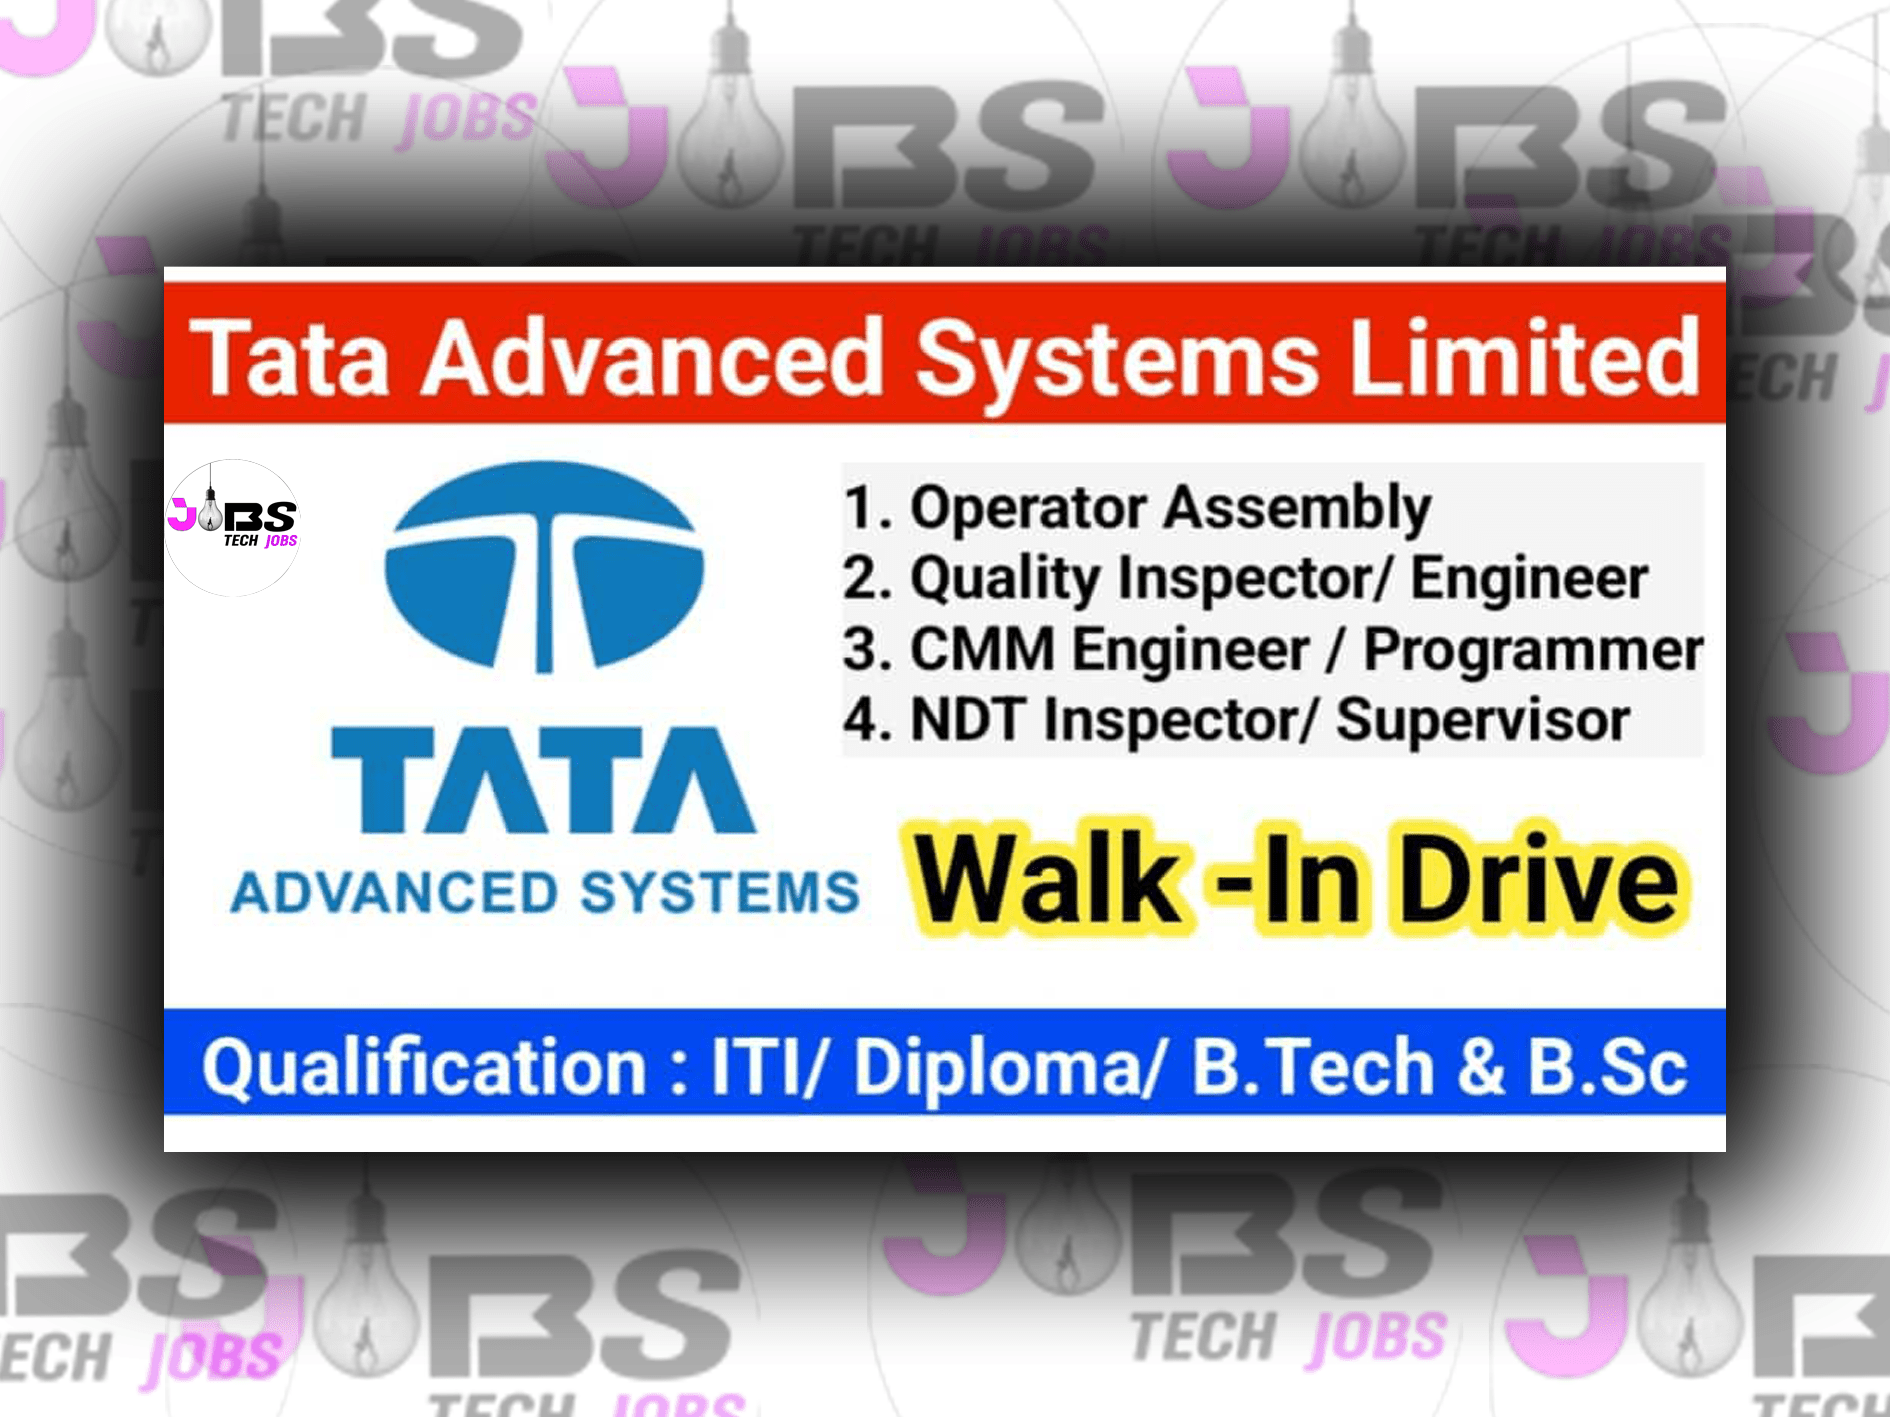 Tata Advanced Systems Limited (TASL) Walk-in Drive in Pune